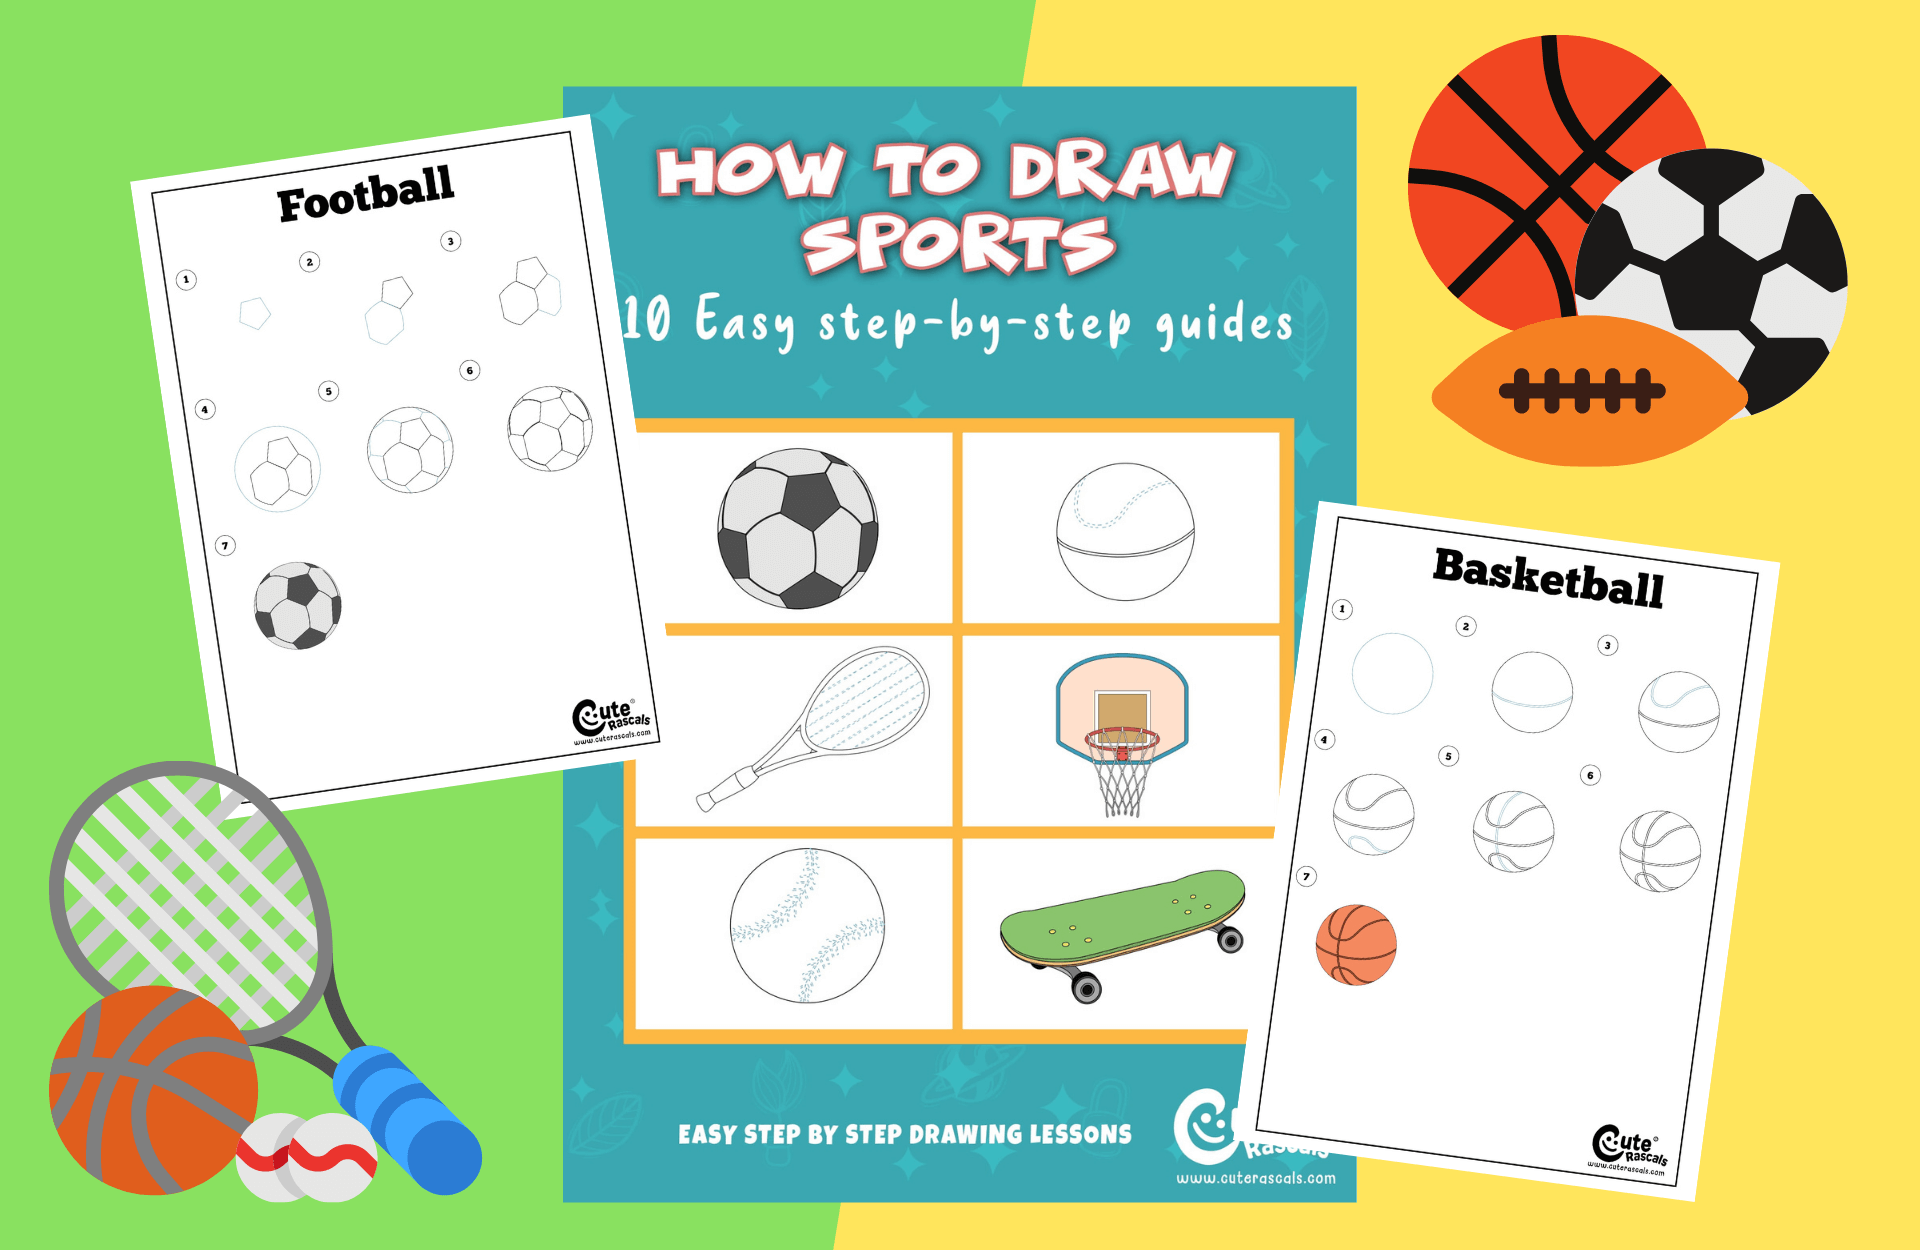 10 Creative Sports Step-By-Step Drawing Guides